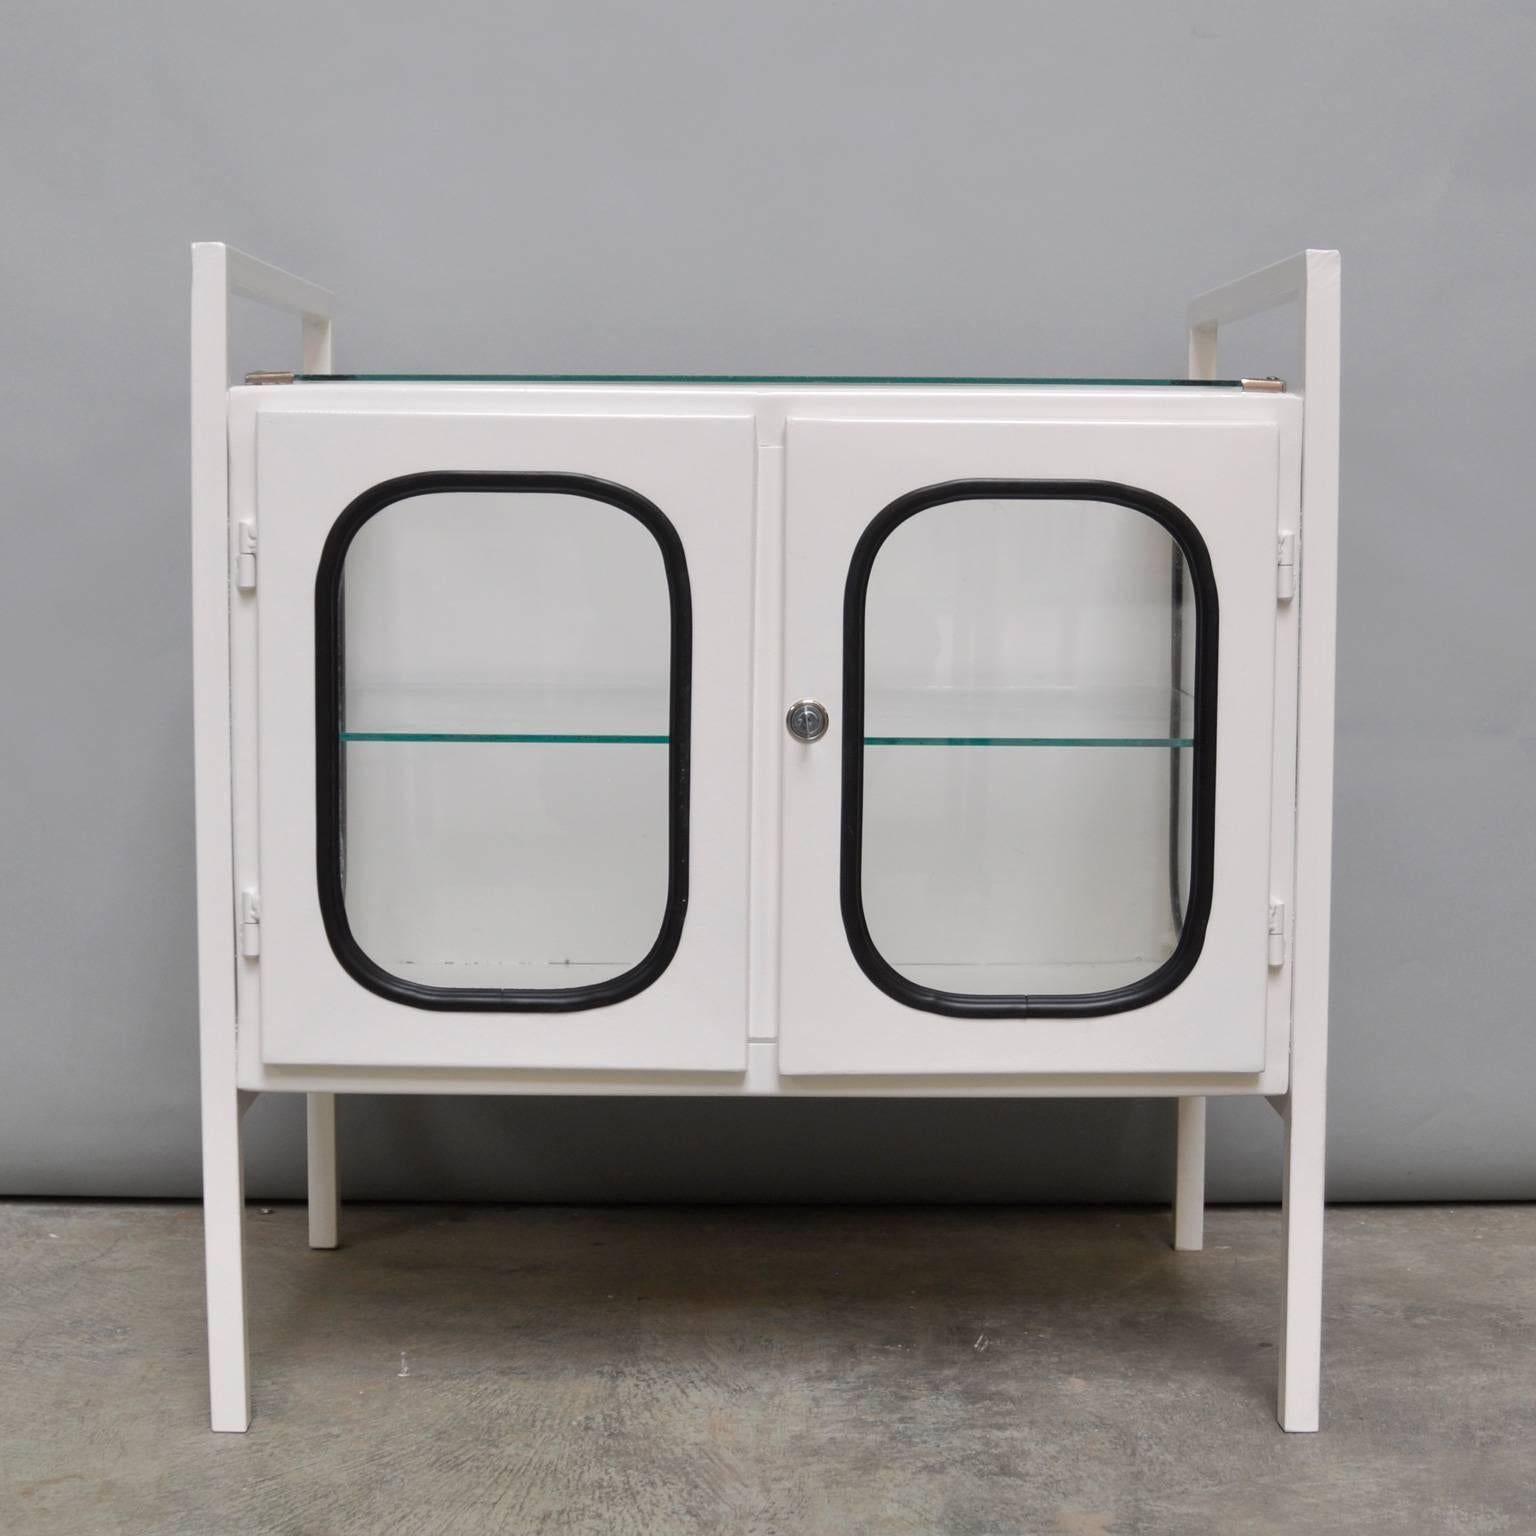 This medicine cabinet was designed in the 1970s and was produced, circa 1975 in Hungary. The piece is made from iron and antique glass and the glass is held by a black rubber strip. The cabinet features one glass shelves and a functioning lock.